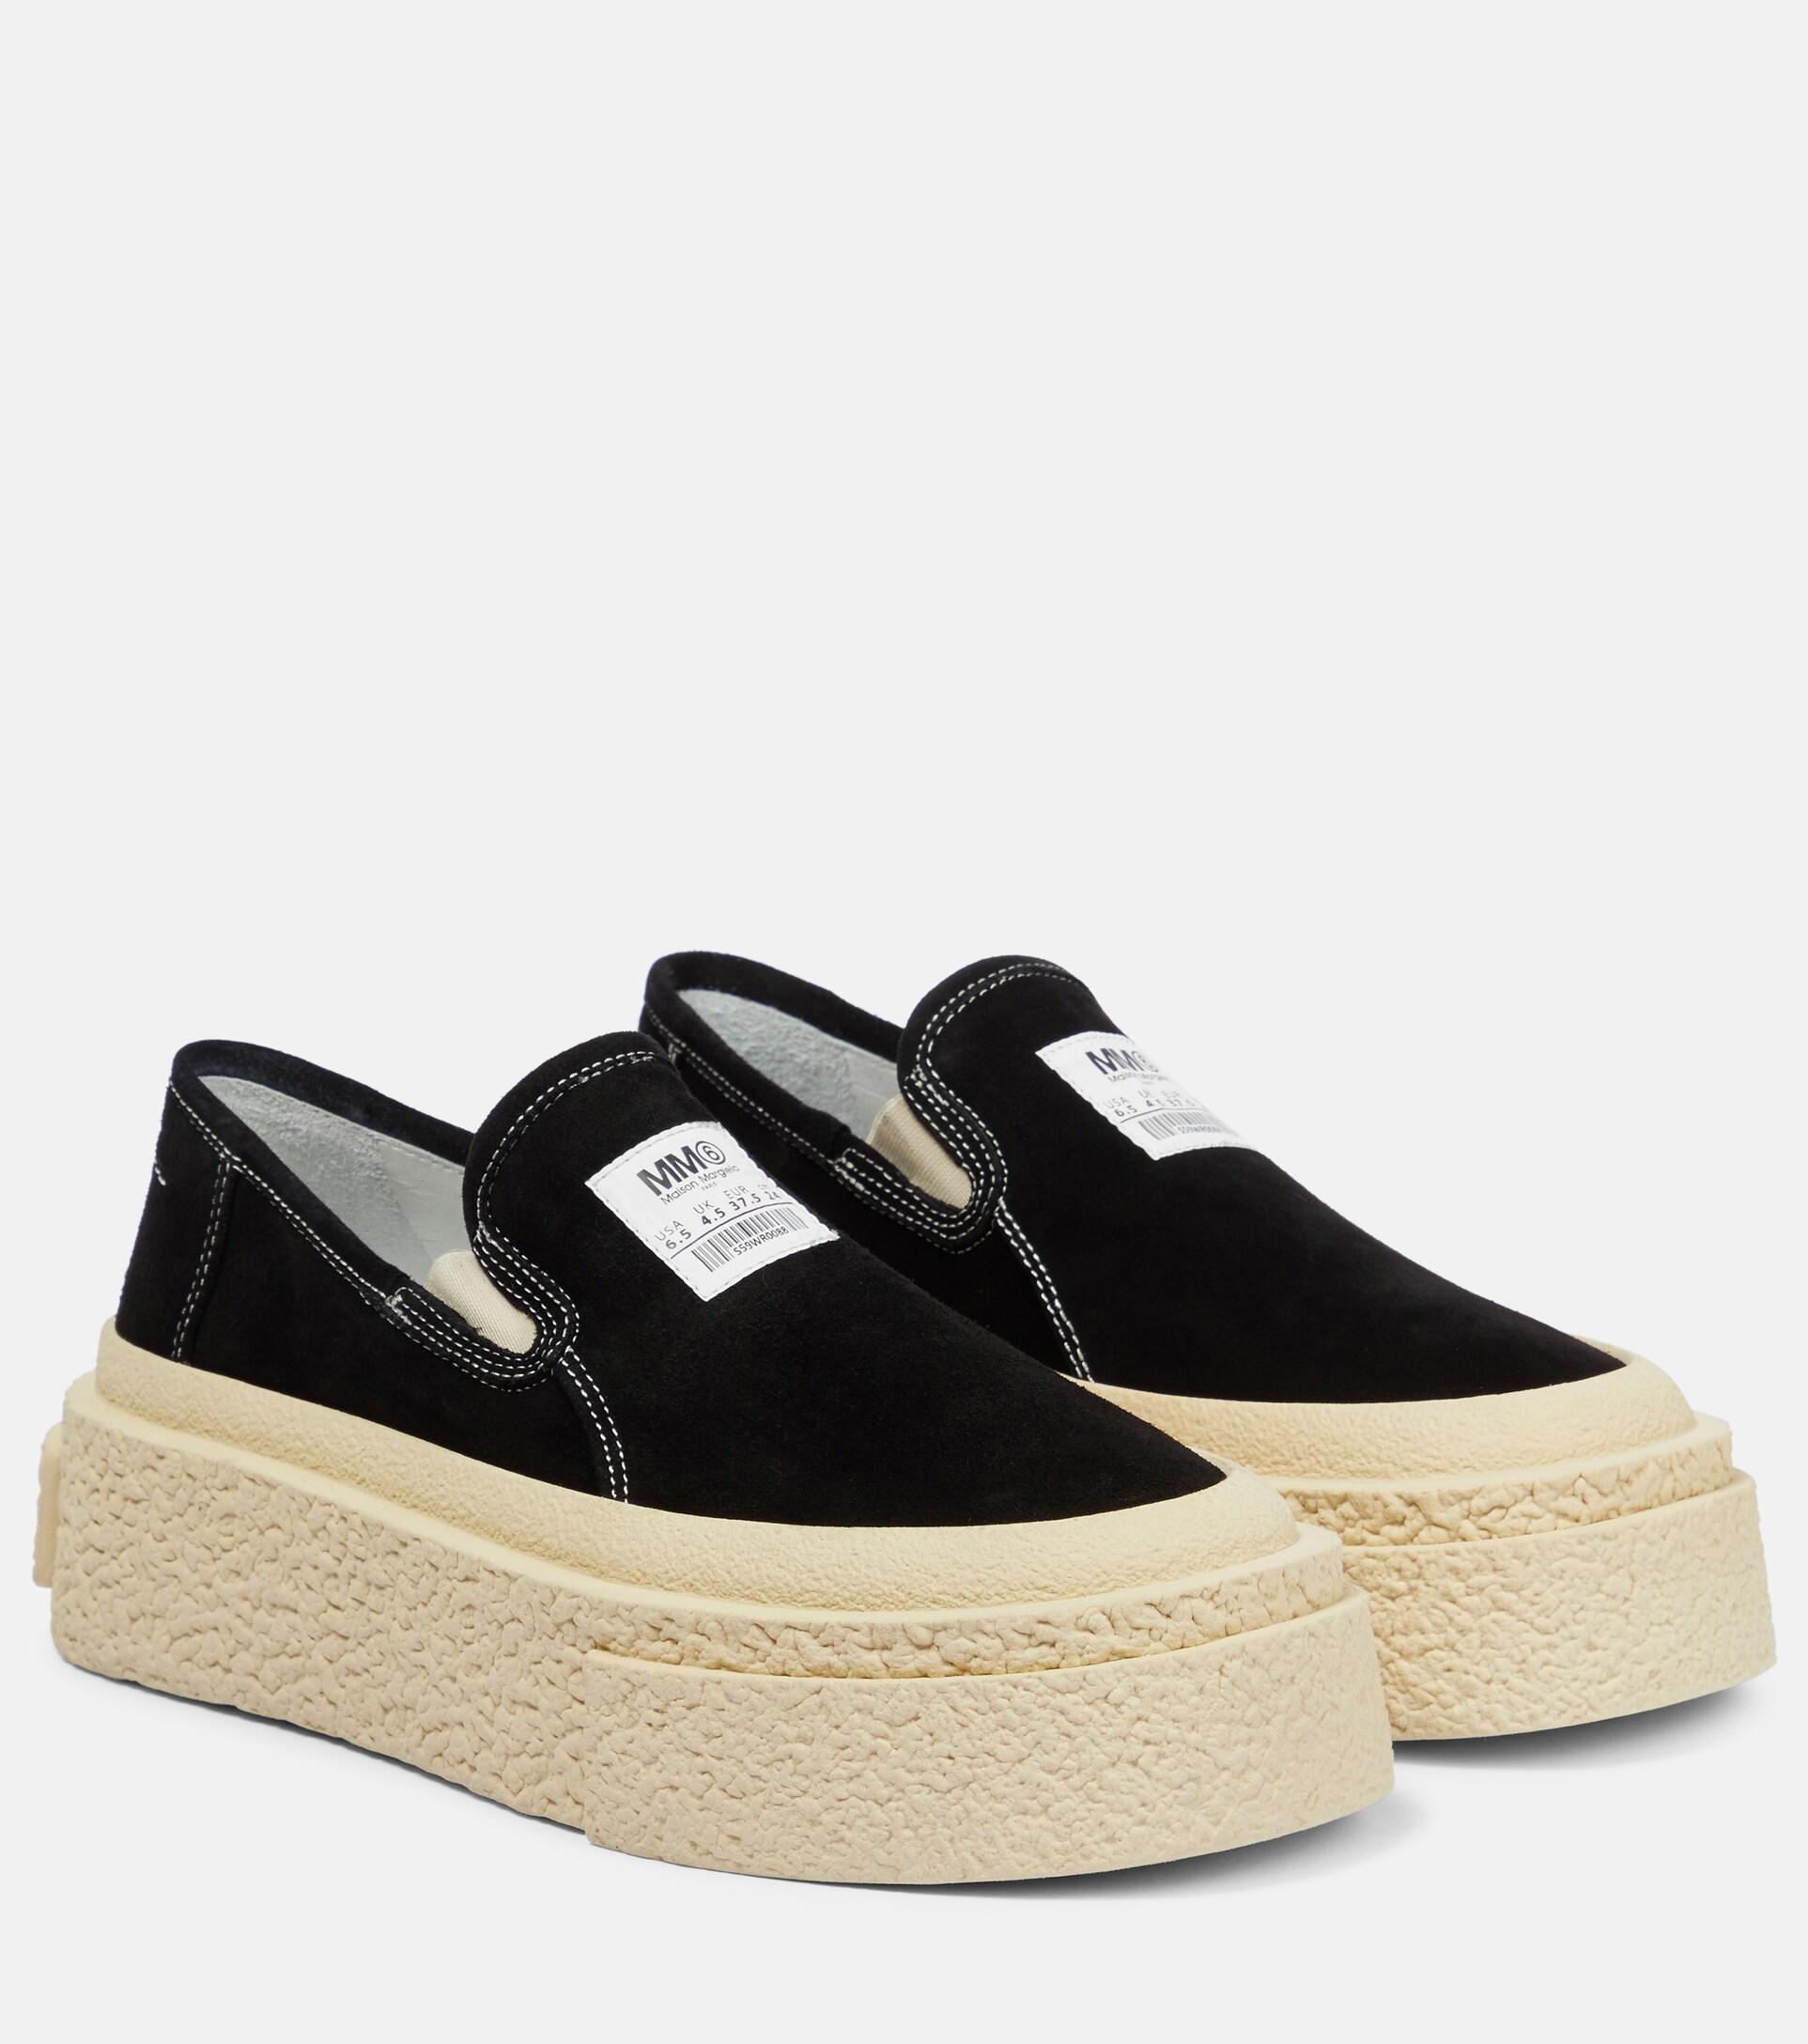 MM6 by Martin Platform Slip-on Sneakers in | Lyst